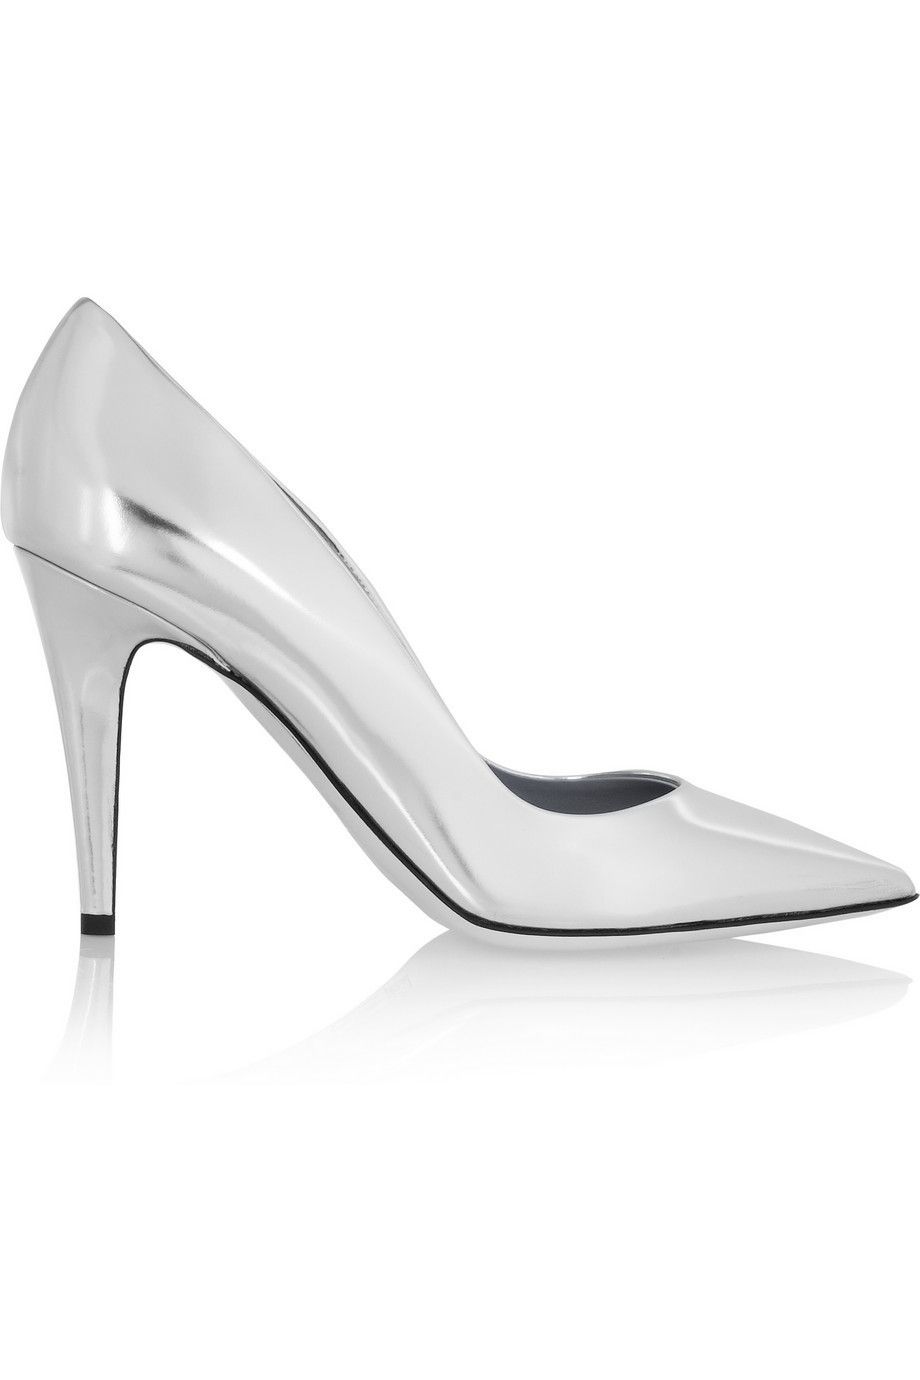 White, Grey, Beige, Composite material, Material property, High heels, Silver, Basic pump, Sandal, Steel, 